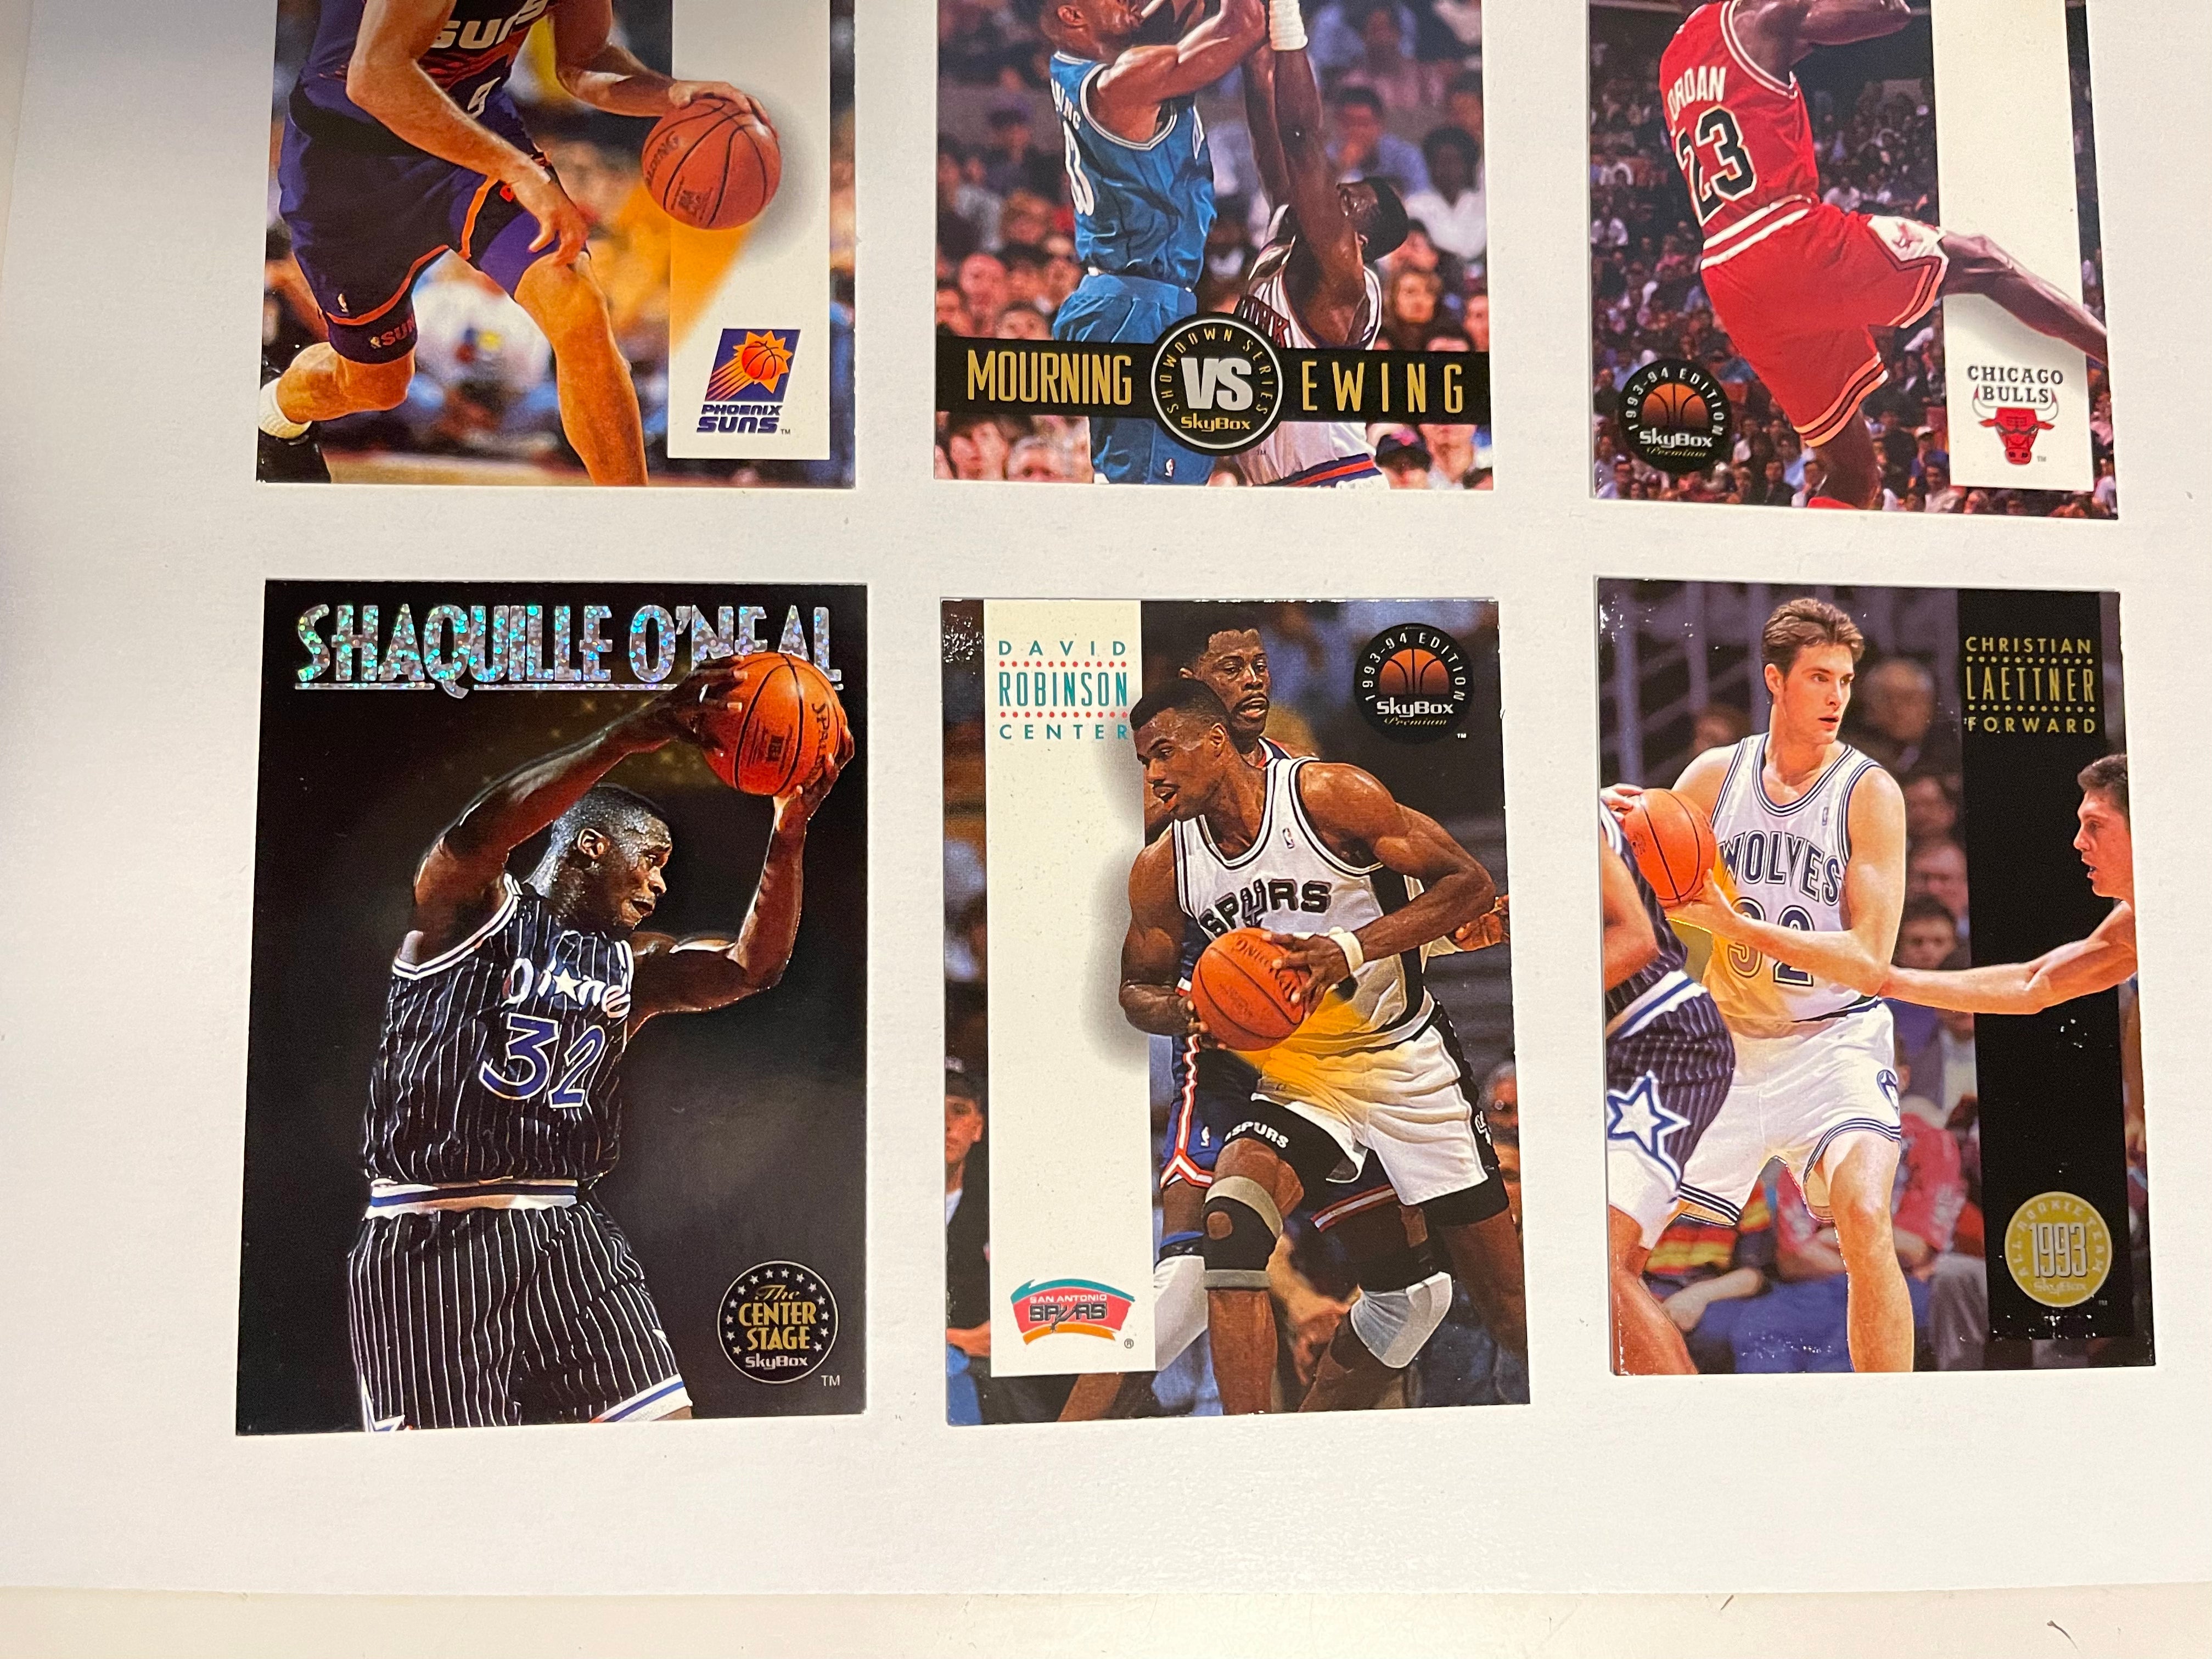 Skybox preview basketball cards set with Jordan and Shaq 1993